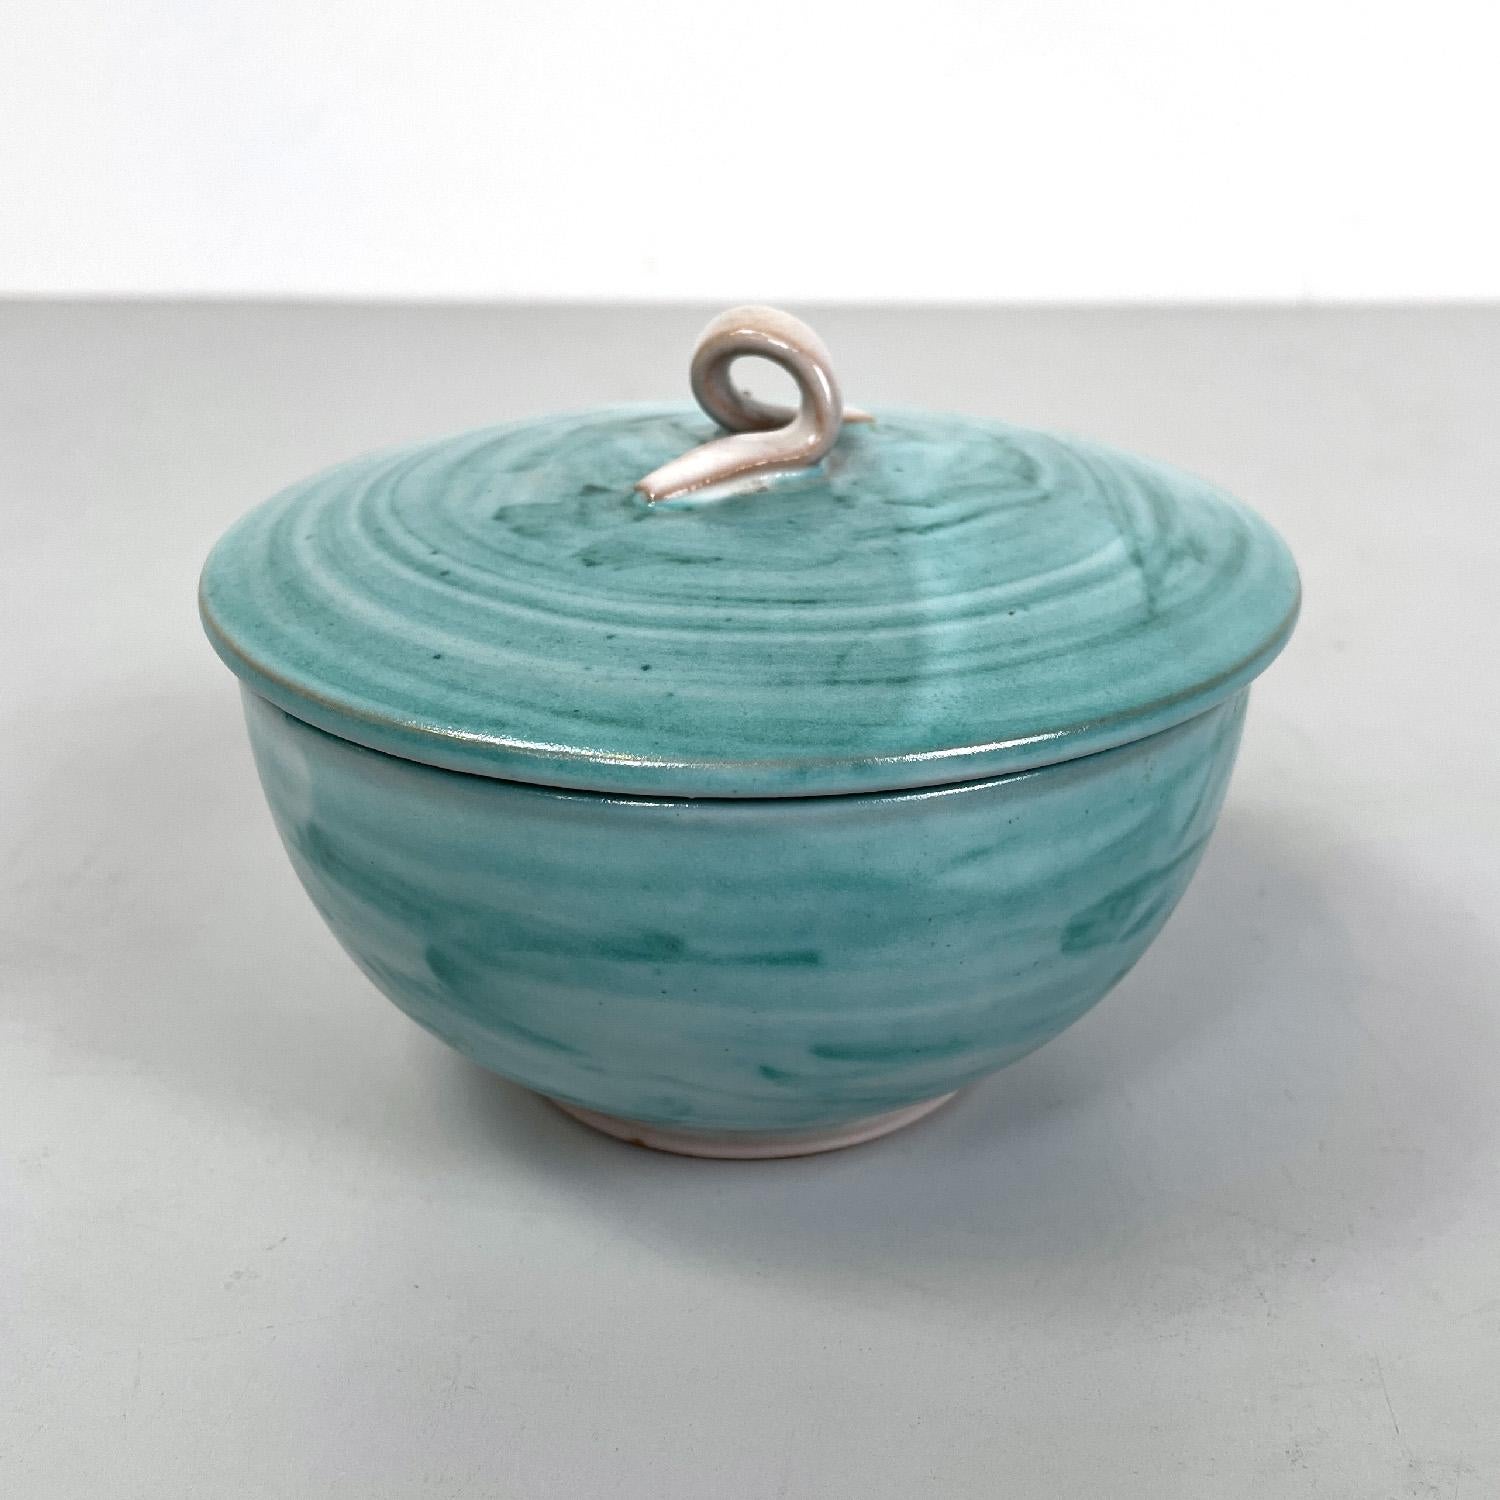 Italian modern light blue ceramic bowl by Bruno Gambone, 1970s
Round ceramic bowl. It has an enamel in shades of light blue on the outside and beige on the inside. On the cap there is an element in the shape of a knotted lace that acts as a handle,